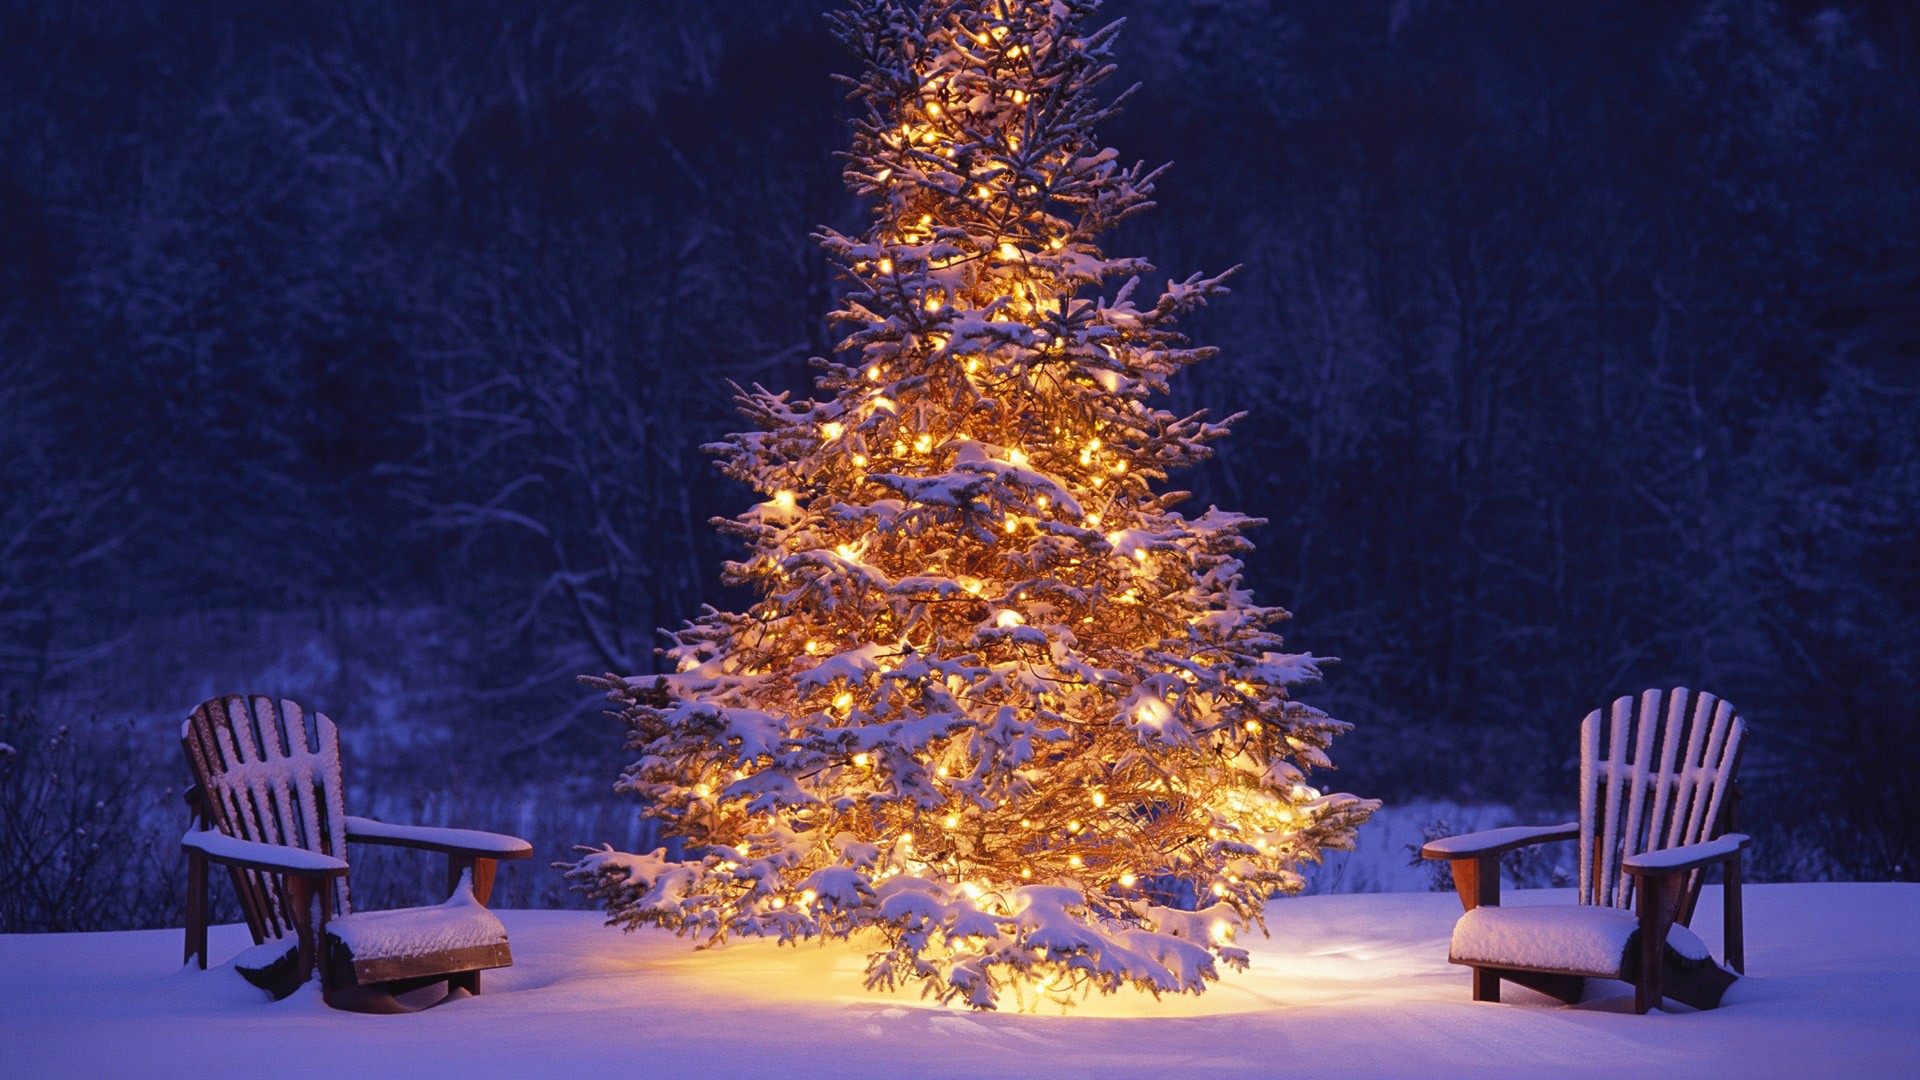 2015 hd Christmas background - wallpapers, images, photos